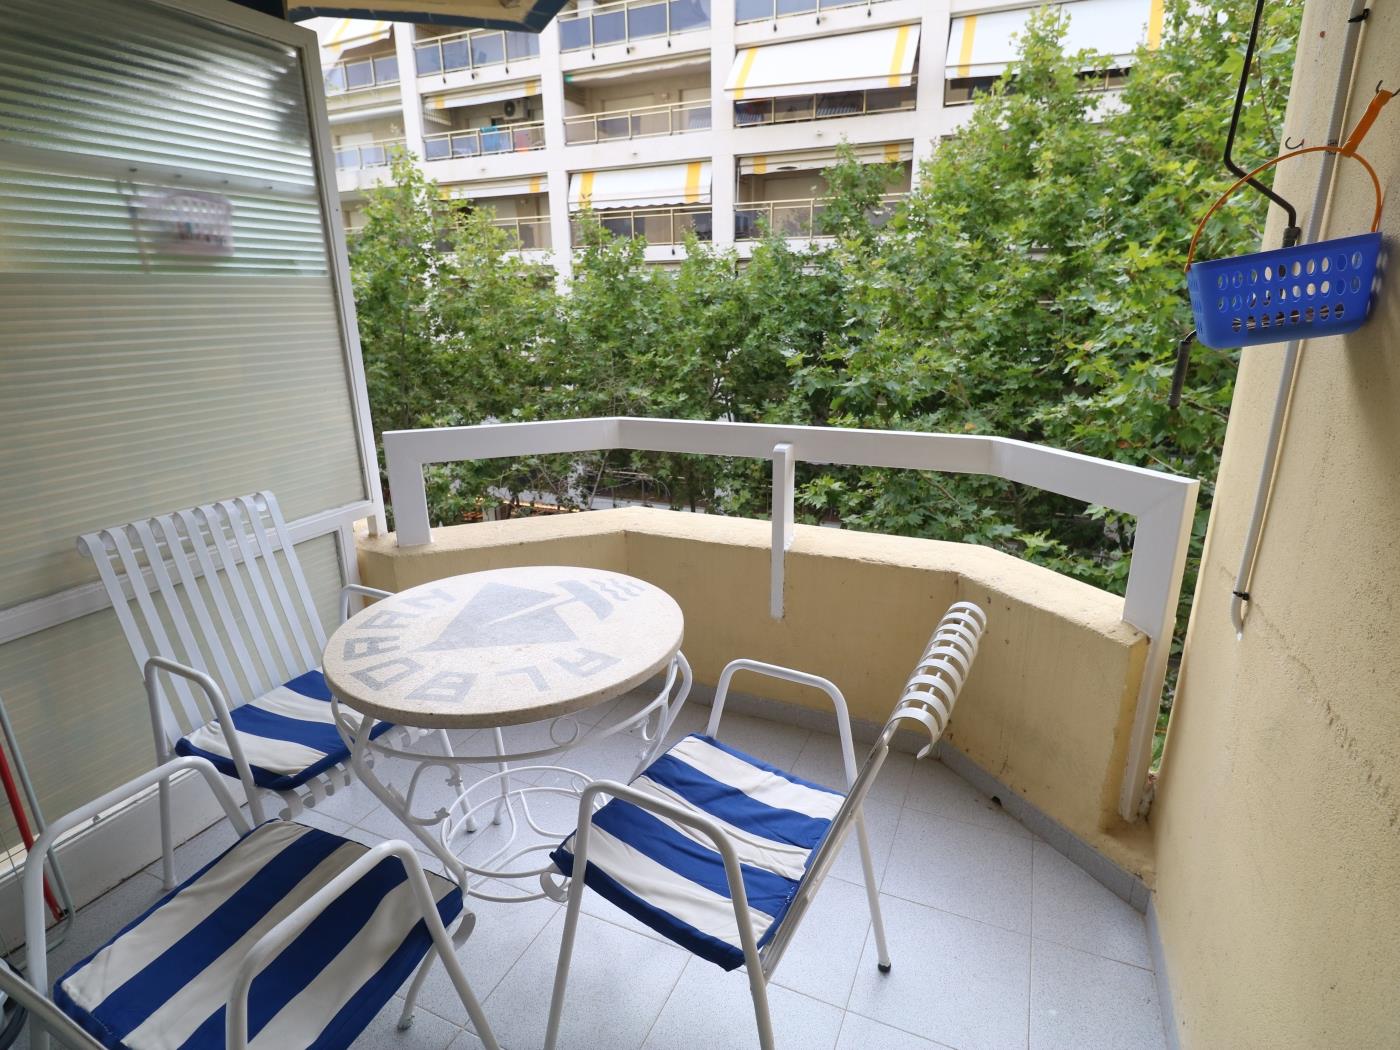 Alboran Apartment,with pool and near the beach in SALOU